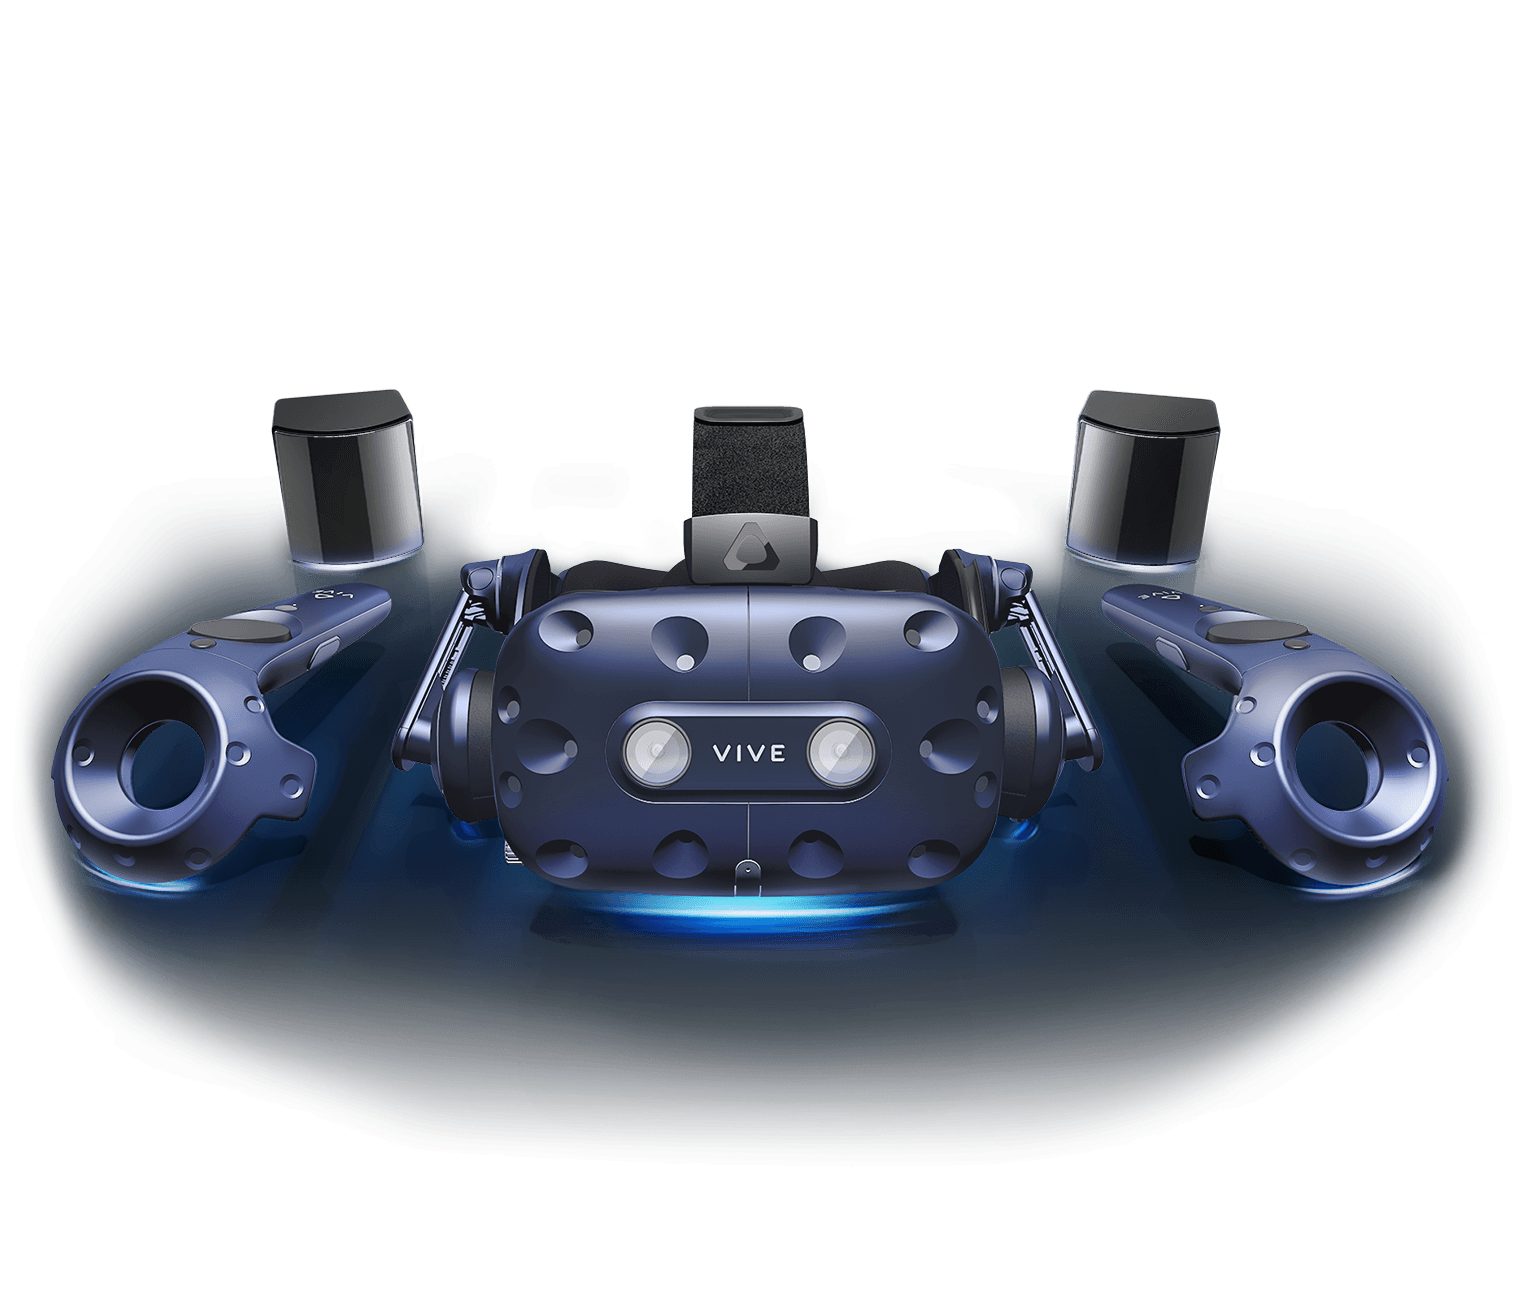 The professional-grade VR headset | VIVE Pro South East Asia